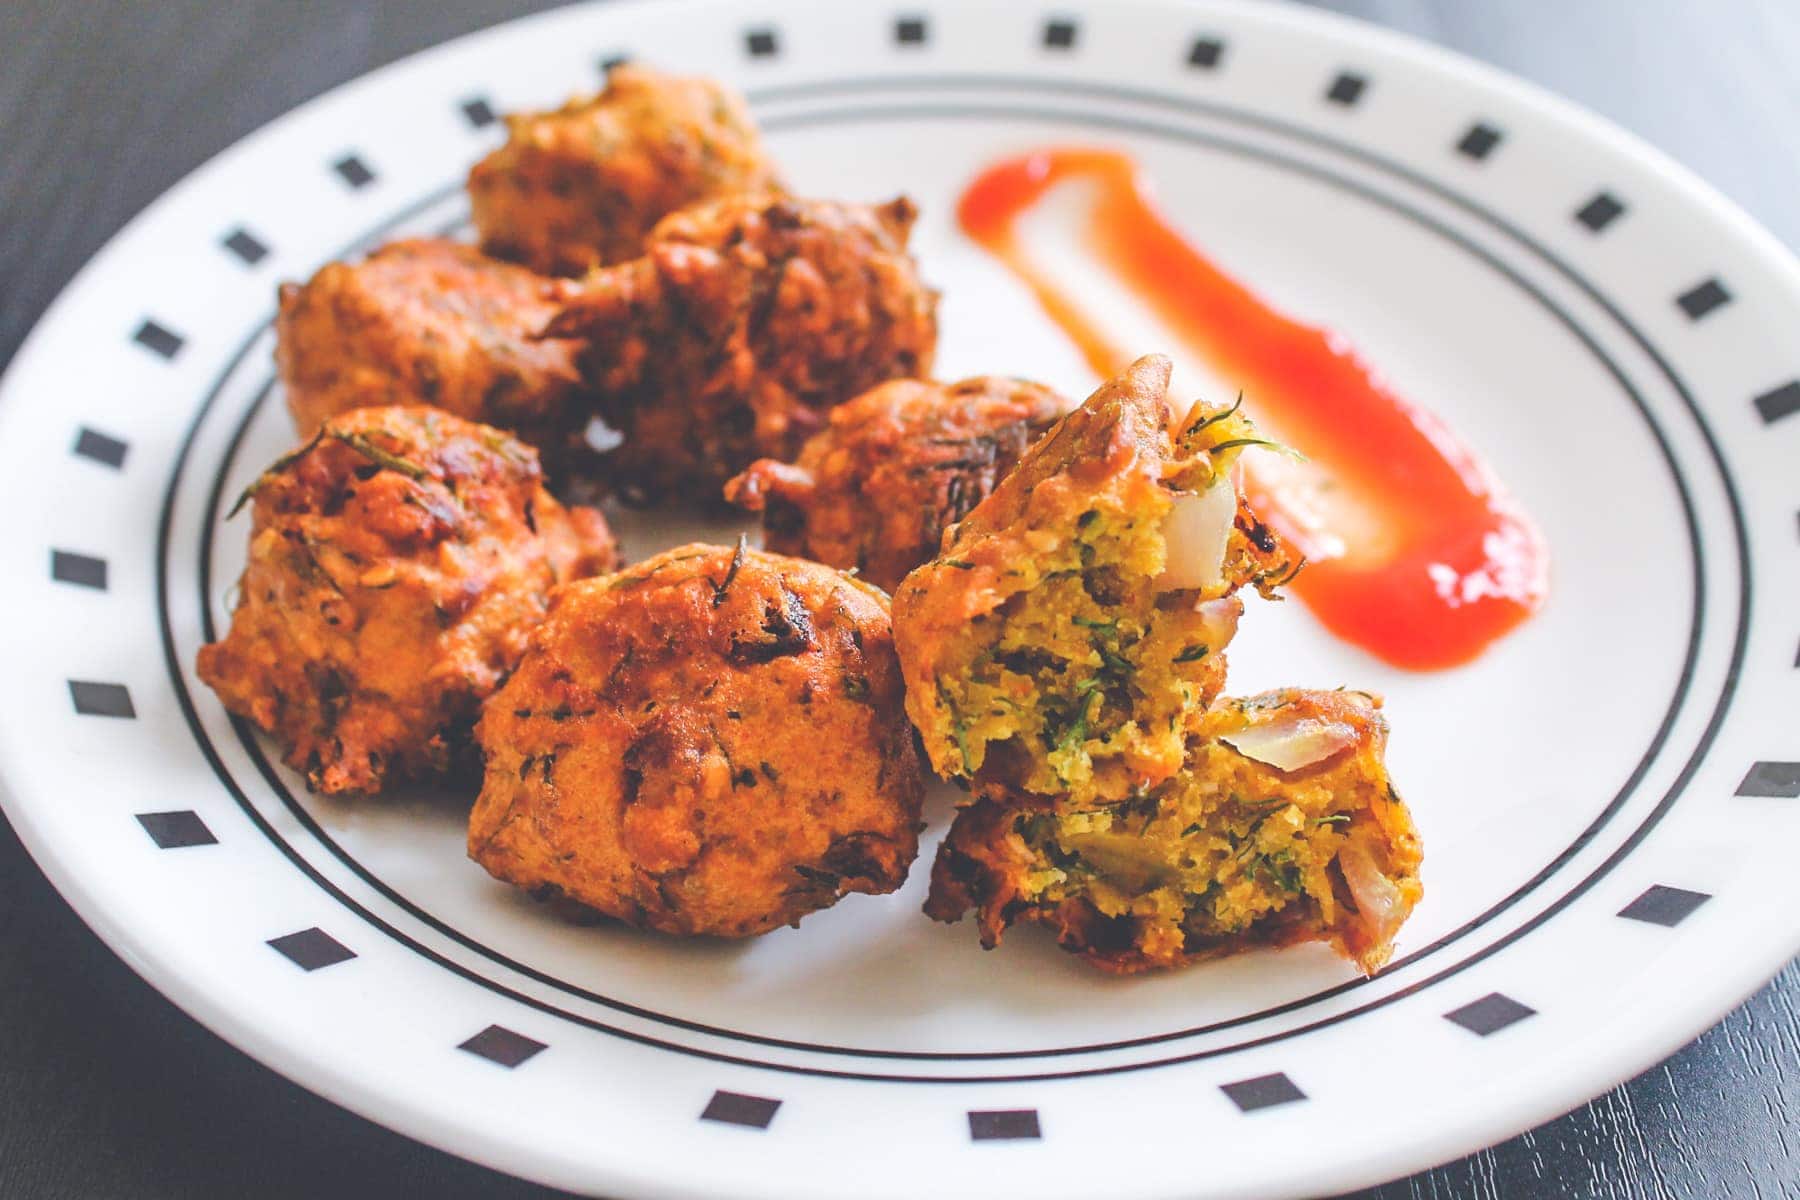 Dill leaves pakoda on a plate with one pakoda is shown inside part